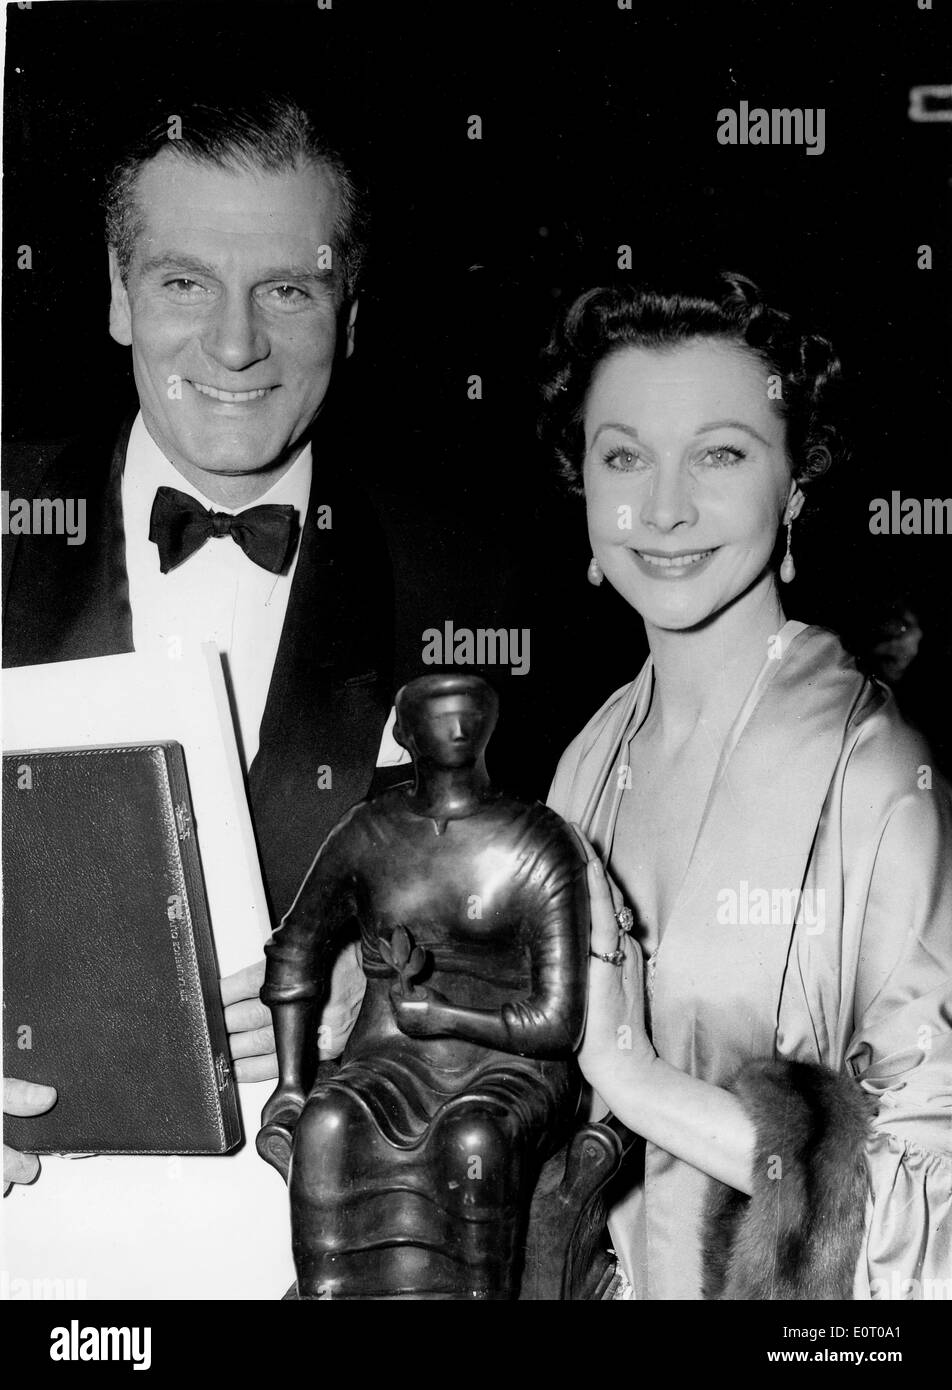 Actor Laurence Olivier receiving an award from his wife Vivien Leigh Stock Photo